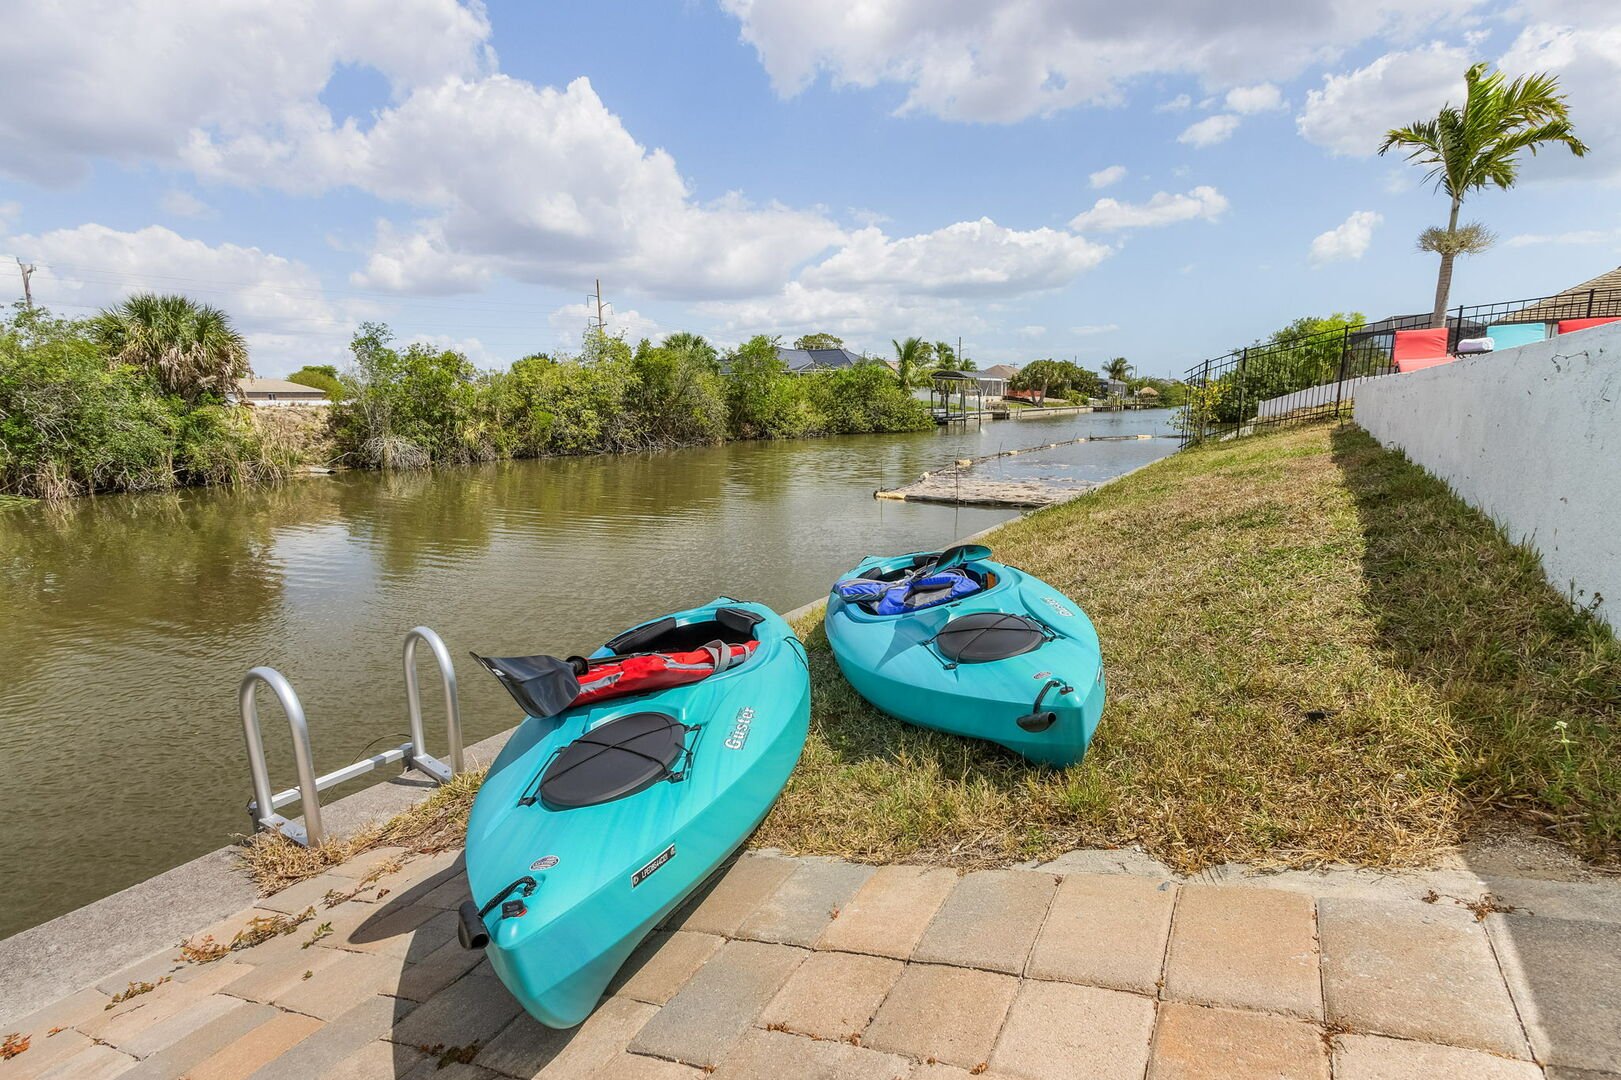 Waterfront Vacation rental with kayaks